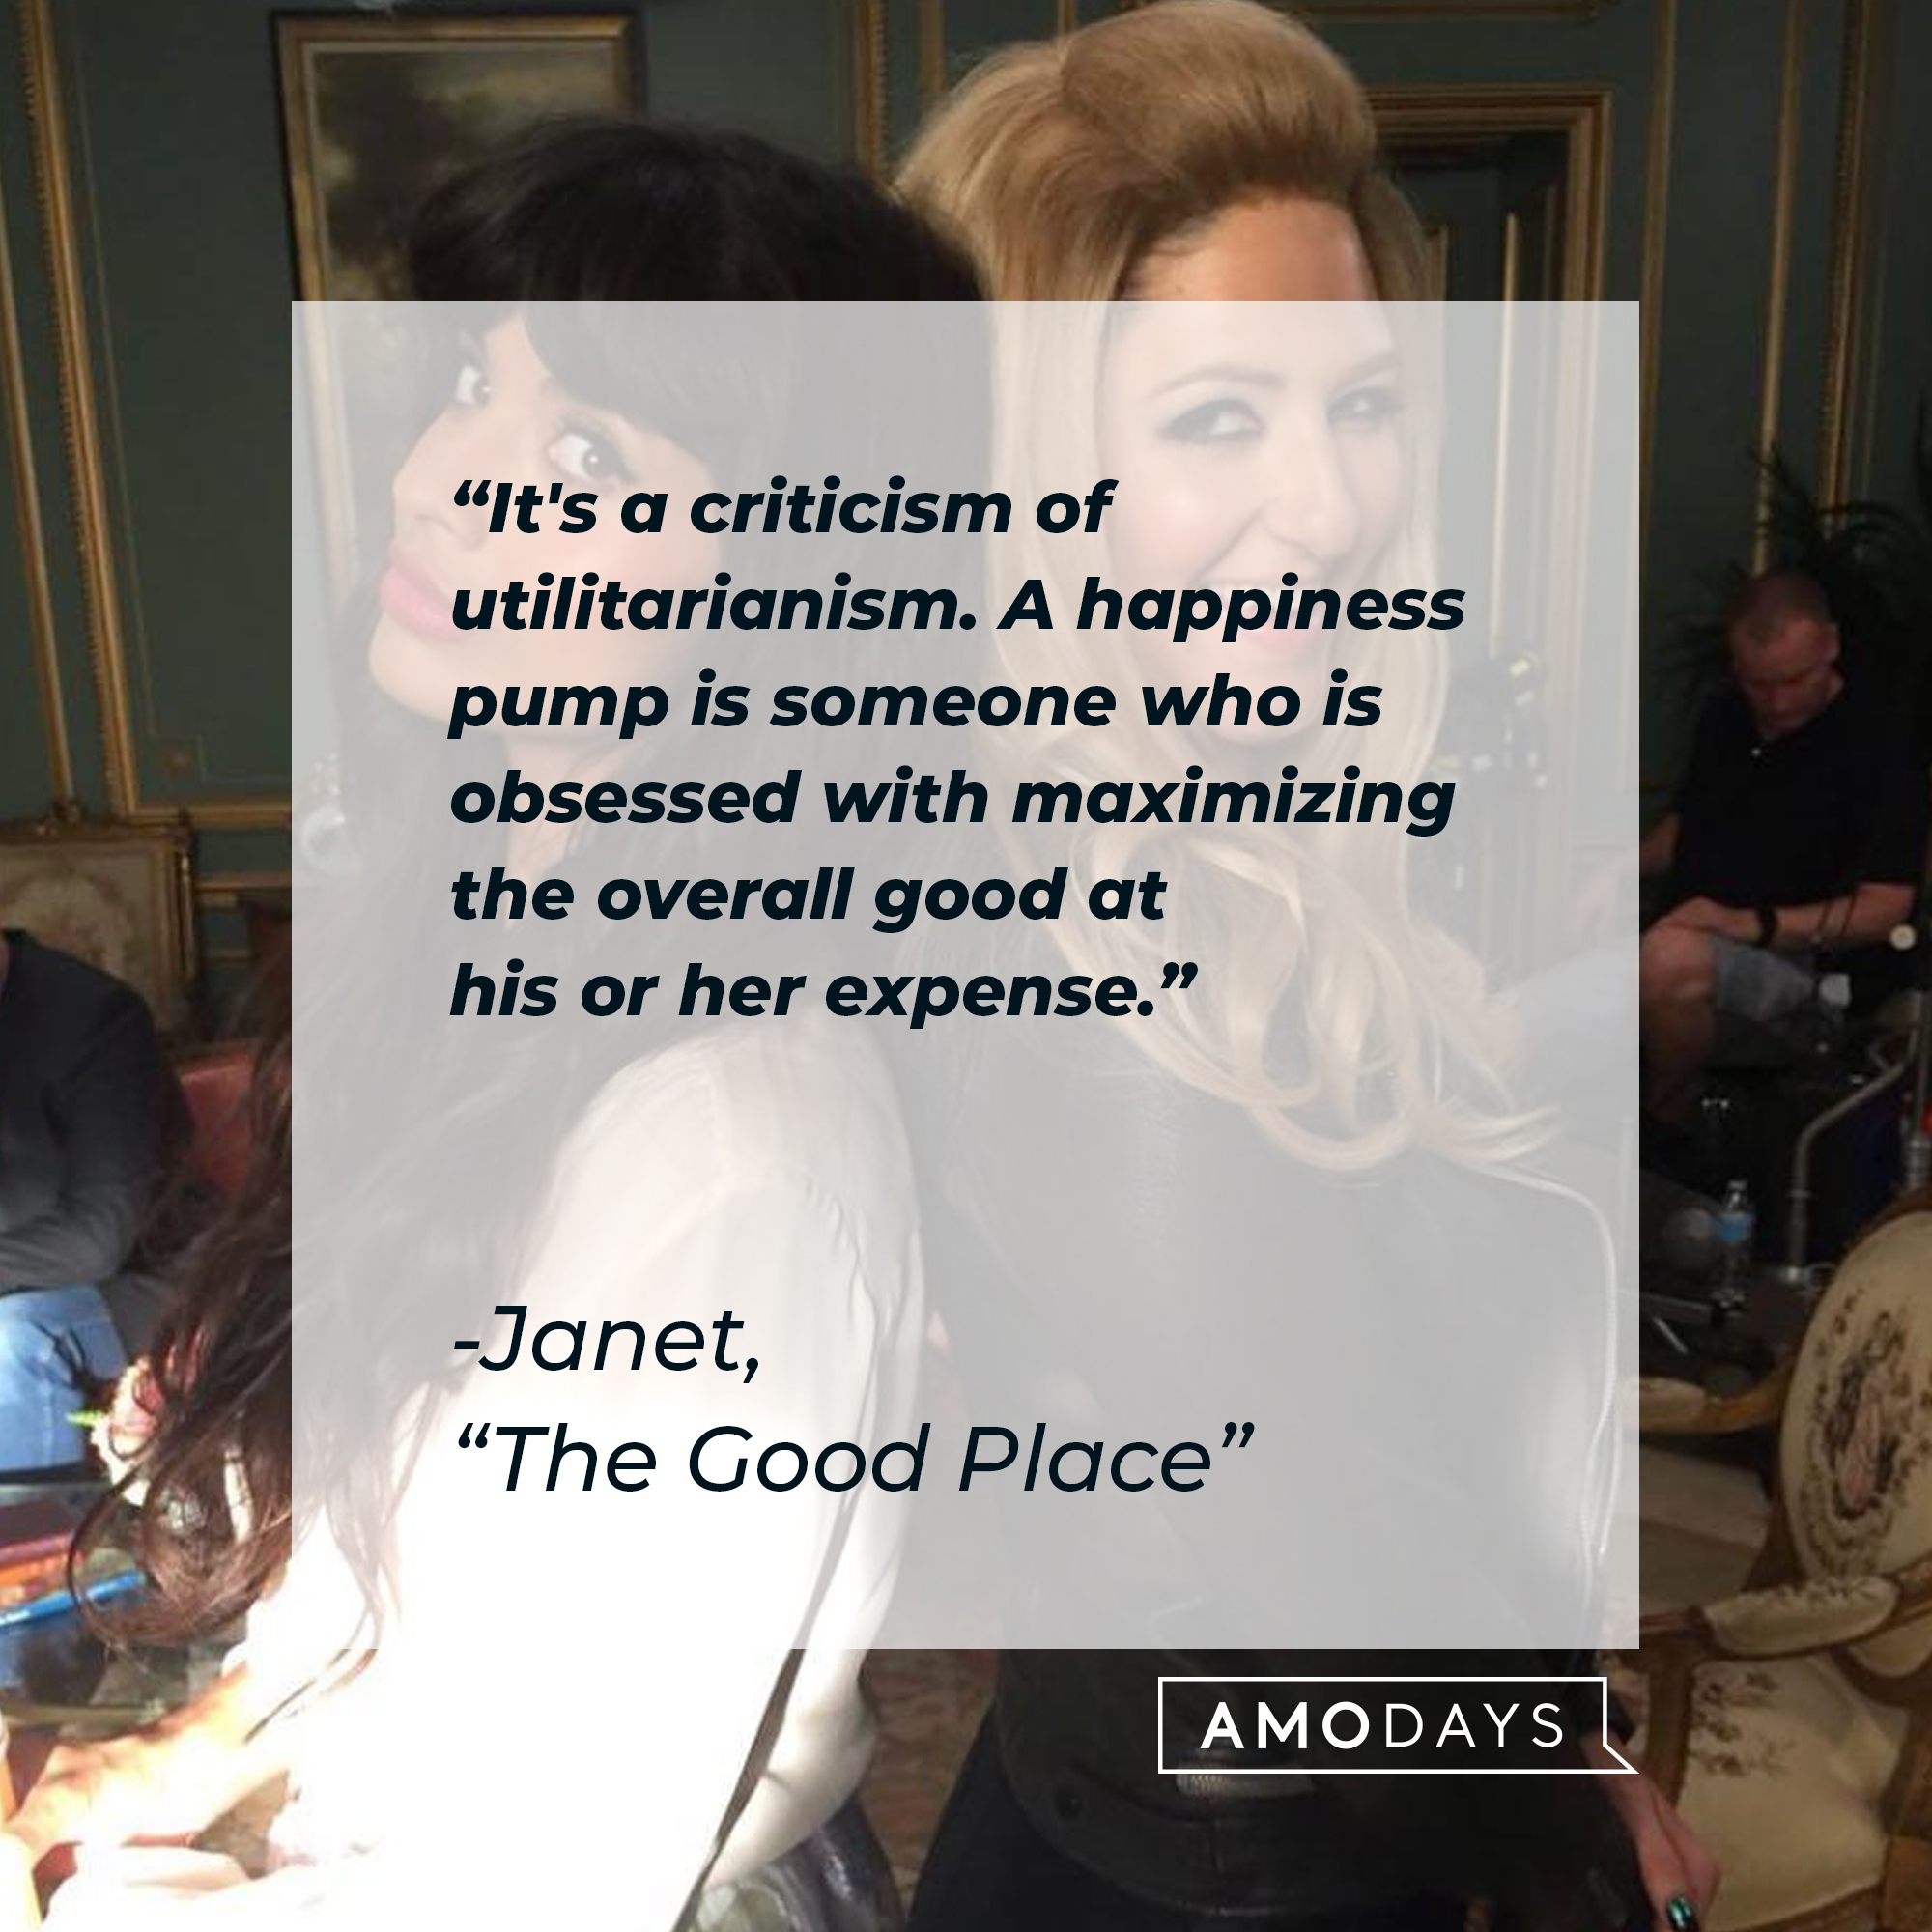 Janet's quote: "It's a criticism of utilitarianism. A happiness pump is someone who is obsessed with maximizing the overall good at his or her expense." | Source: facebook.com/NBCTheGoodPlace